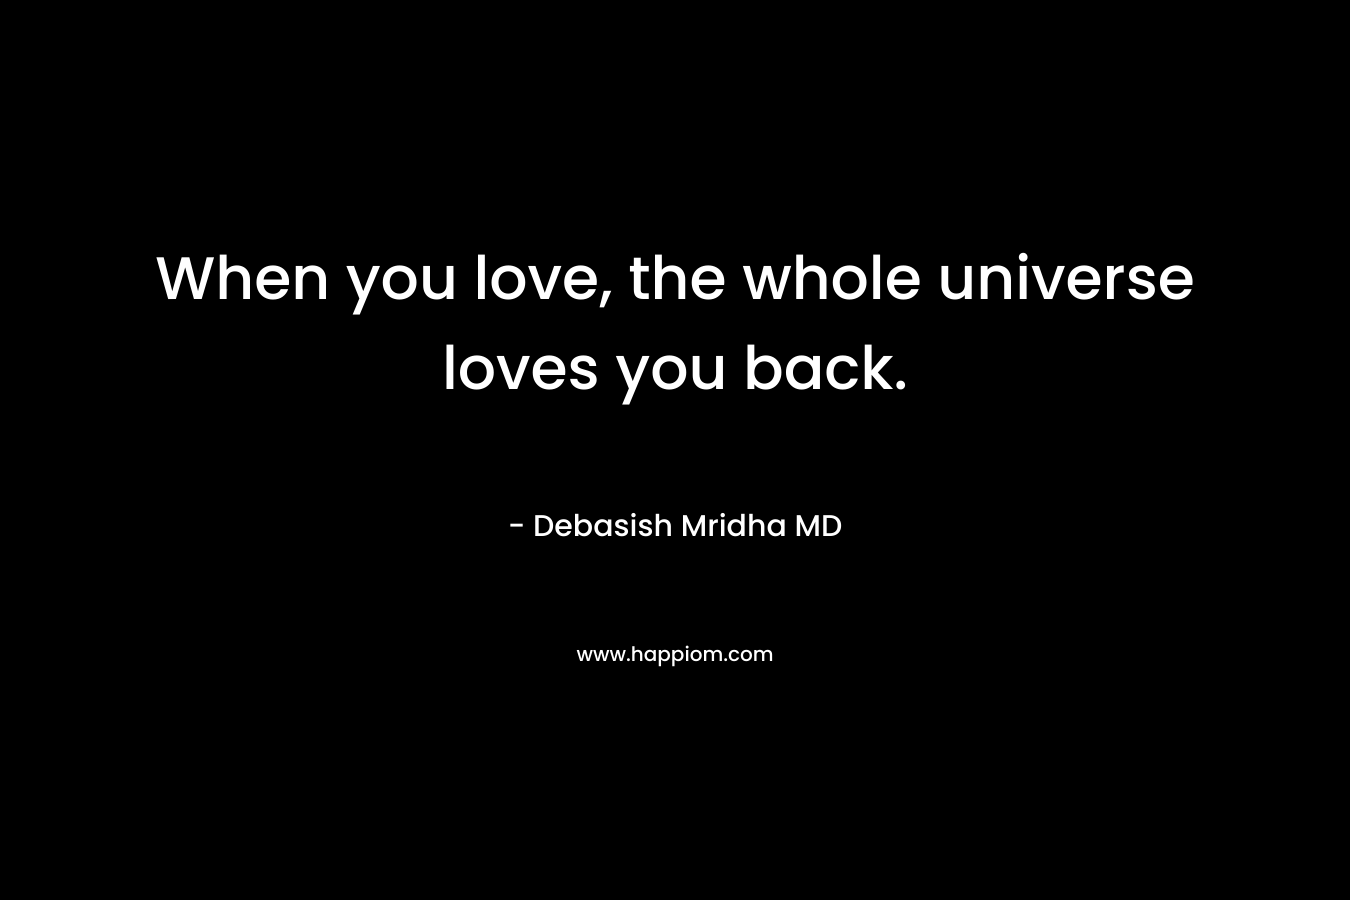 When you love, the whole universe loves you back.